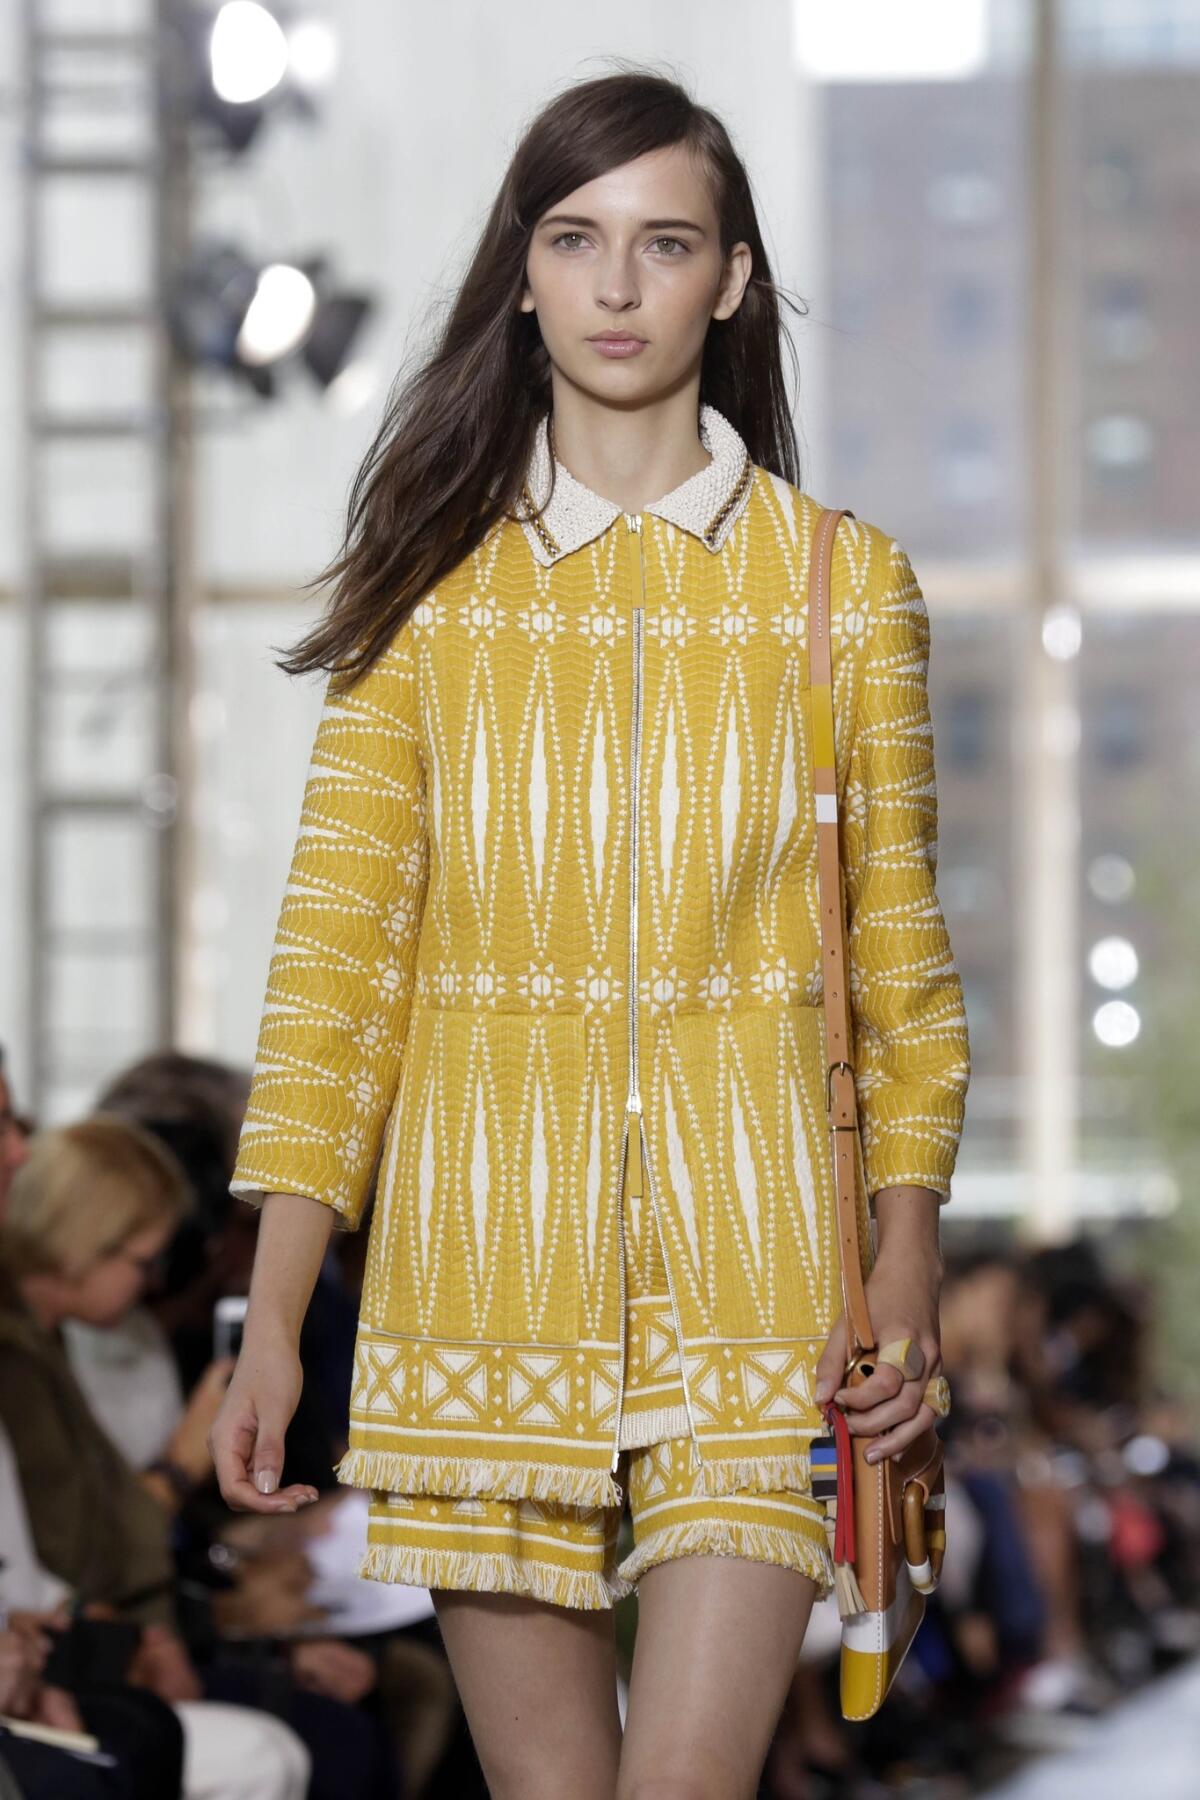 A look from the Tory Burch Spring 2015 collection modeled Tuesday as part of New York Fashion Week.